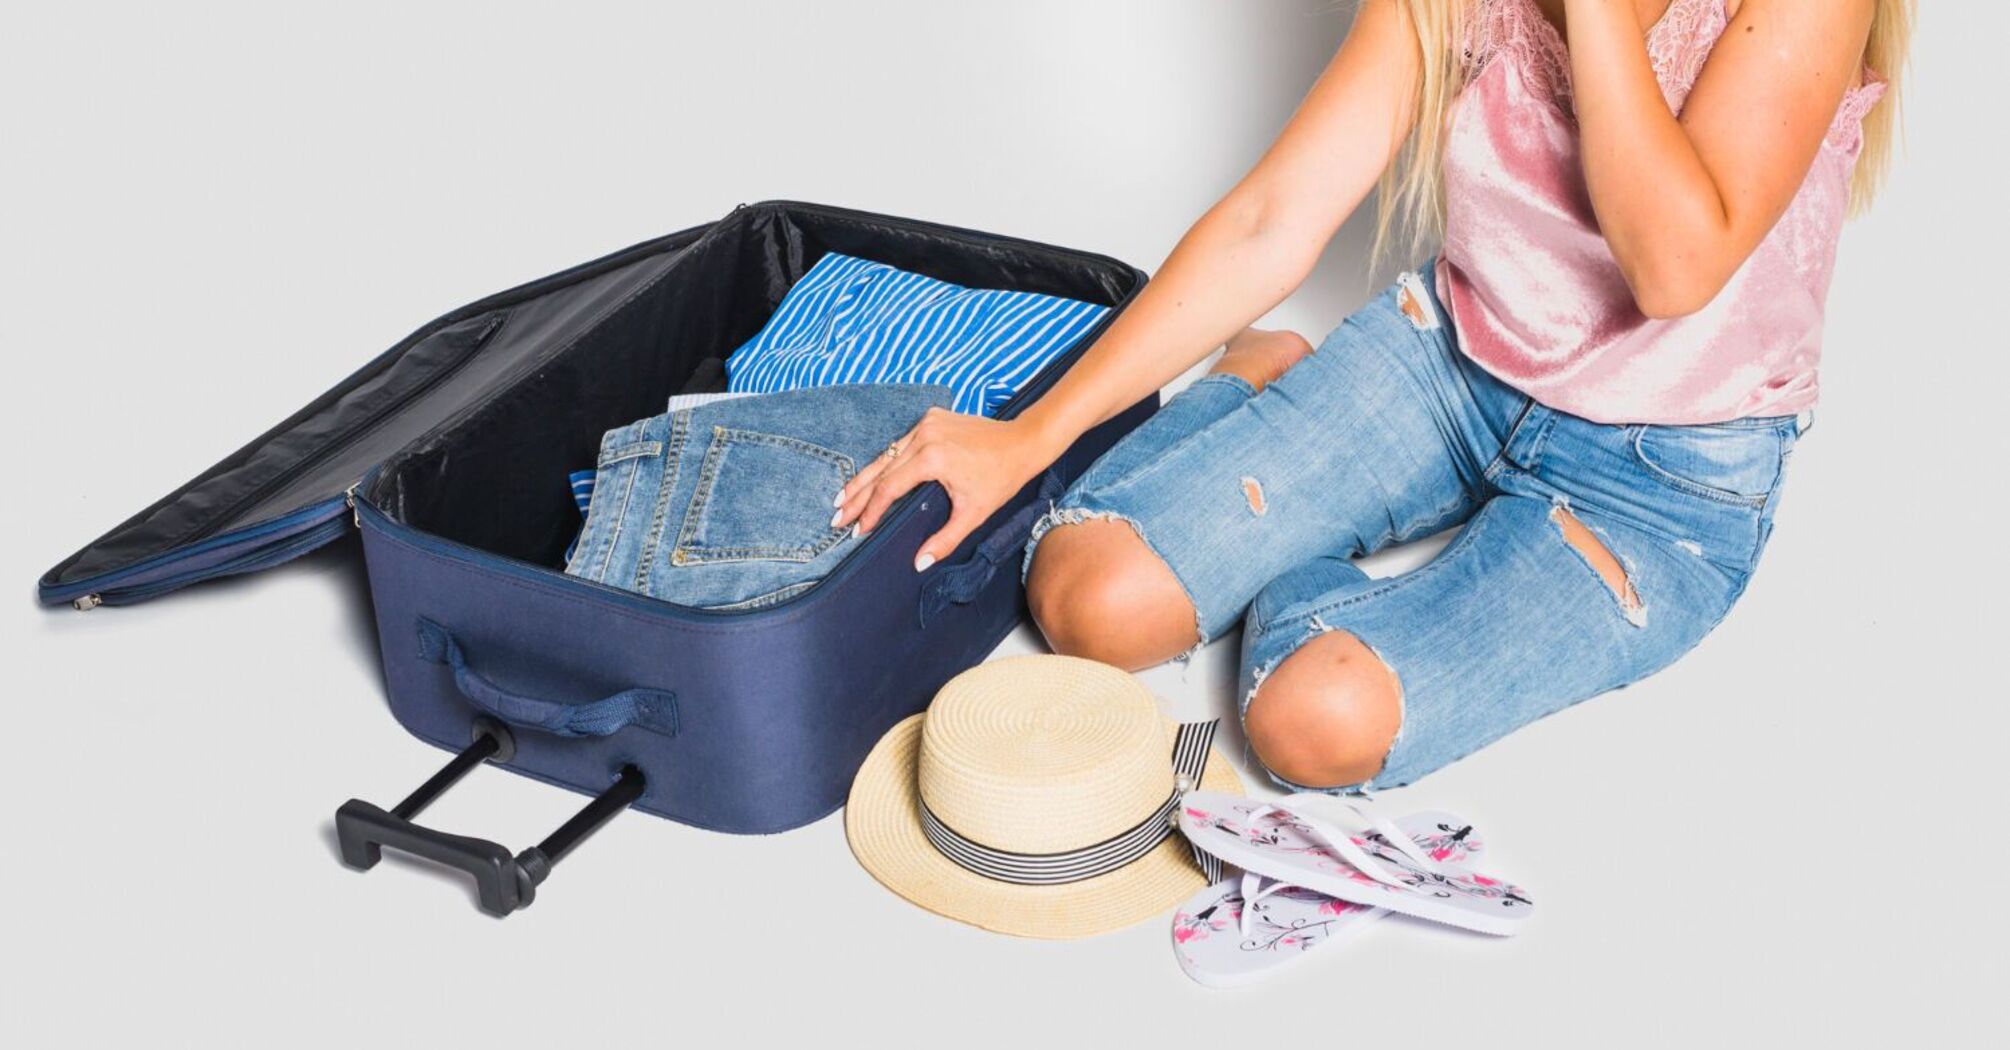 The Ryanair travel bag for £12.99 passed the airplane check: all the luggage for 2 weeks fit in